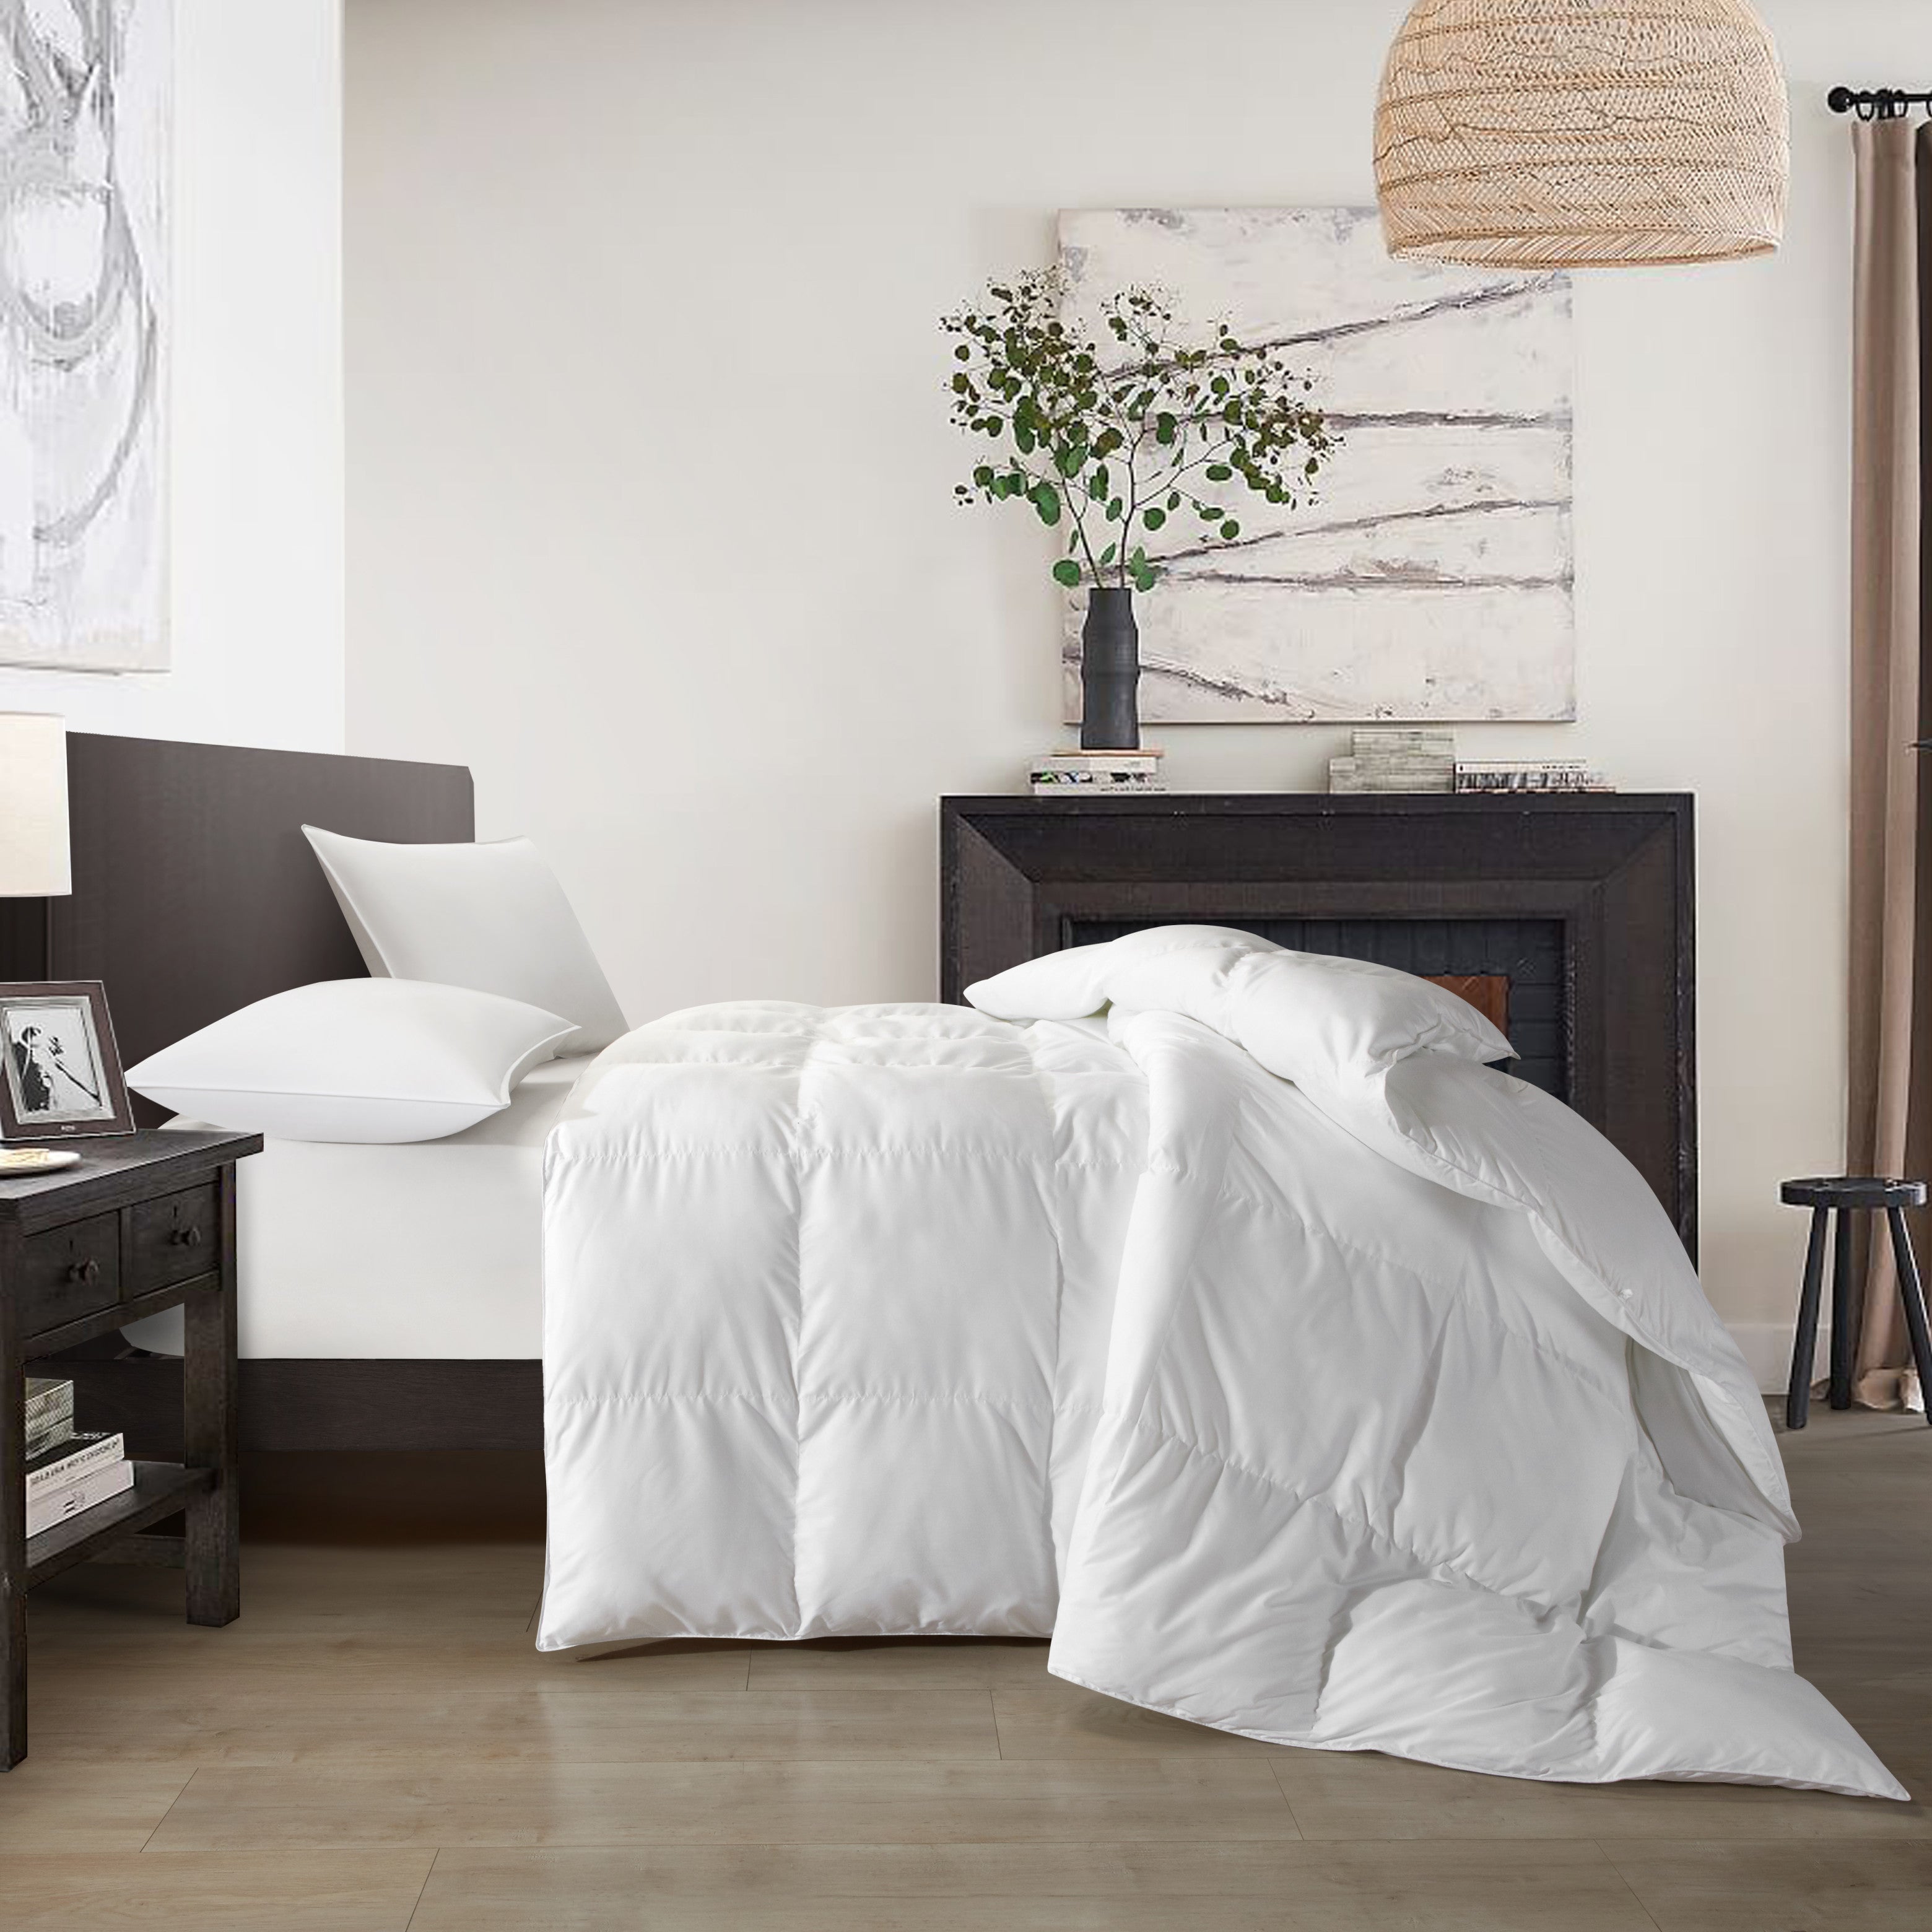 NY&C Home Easeland Box Stitched Comforter 